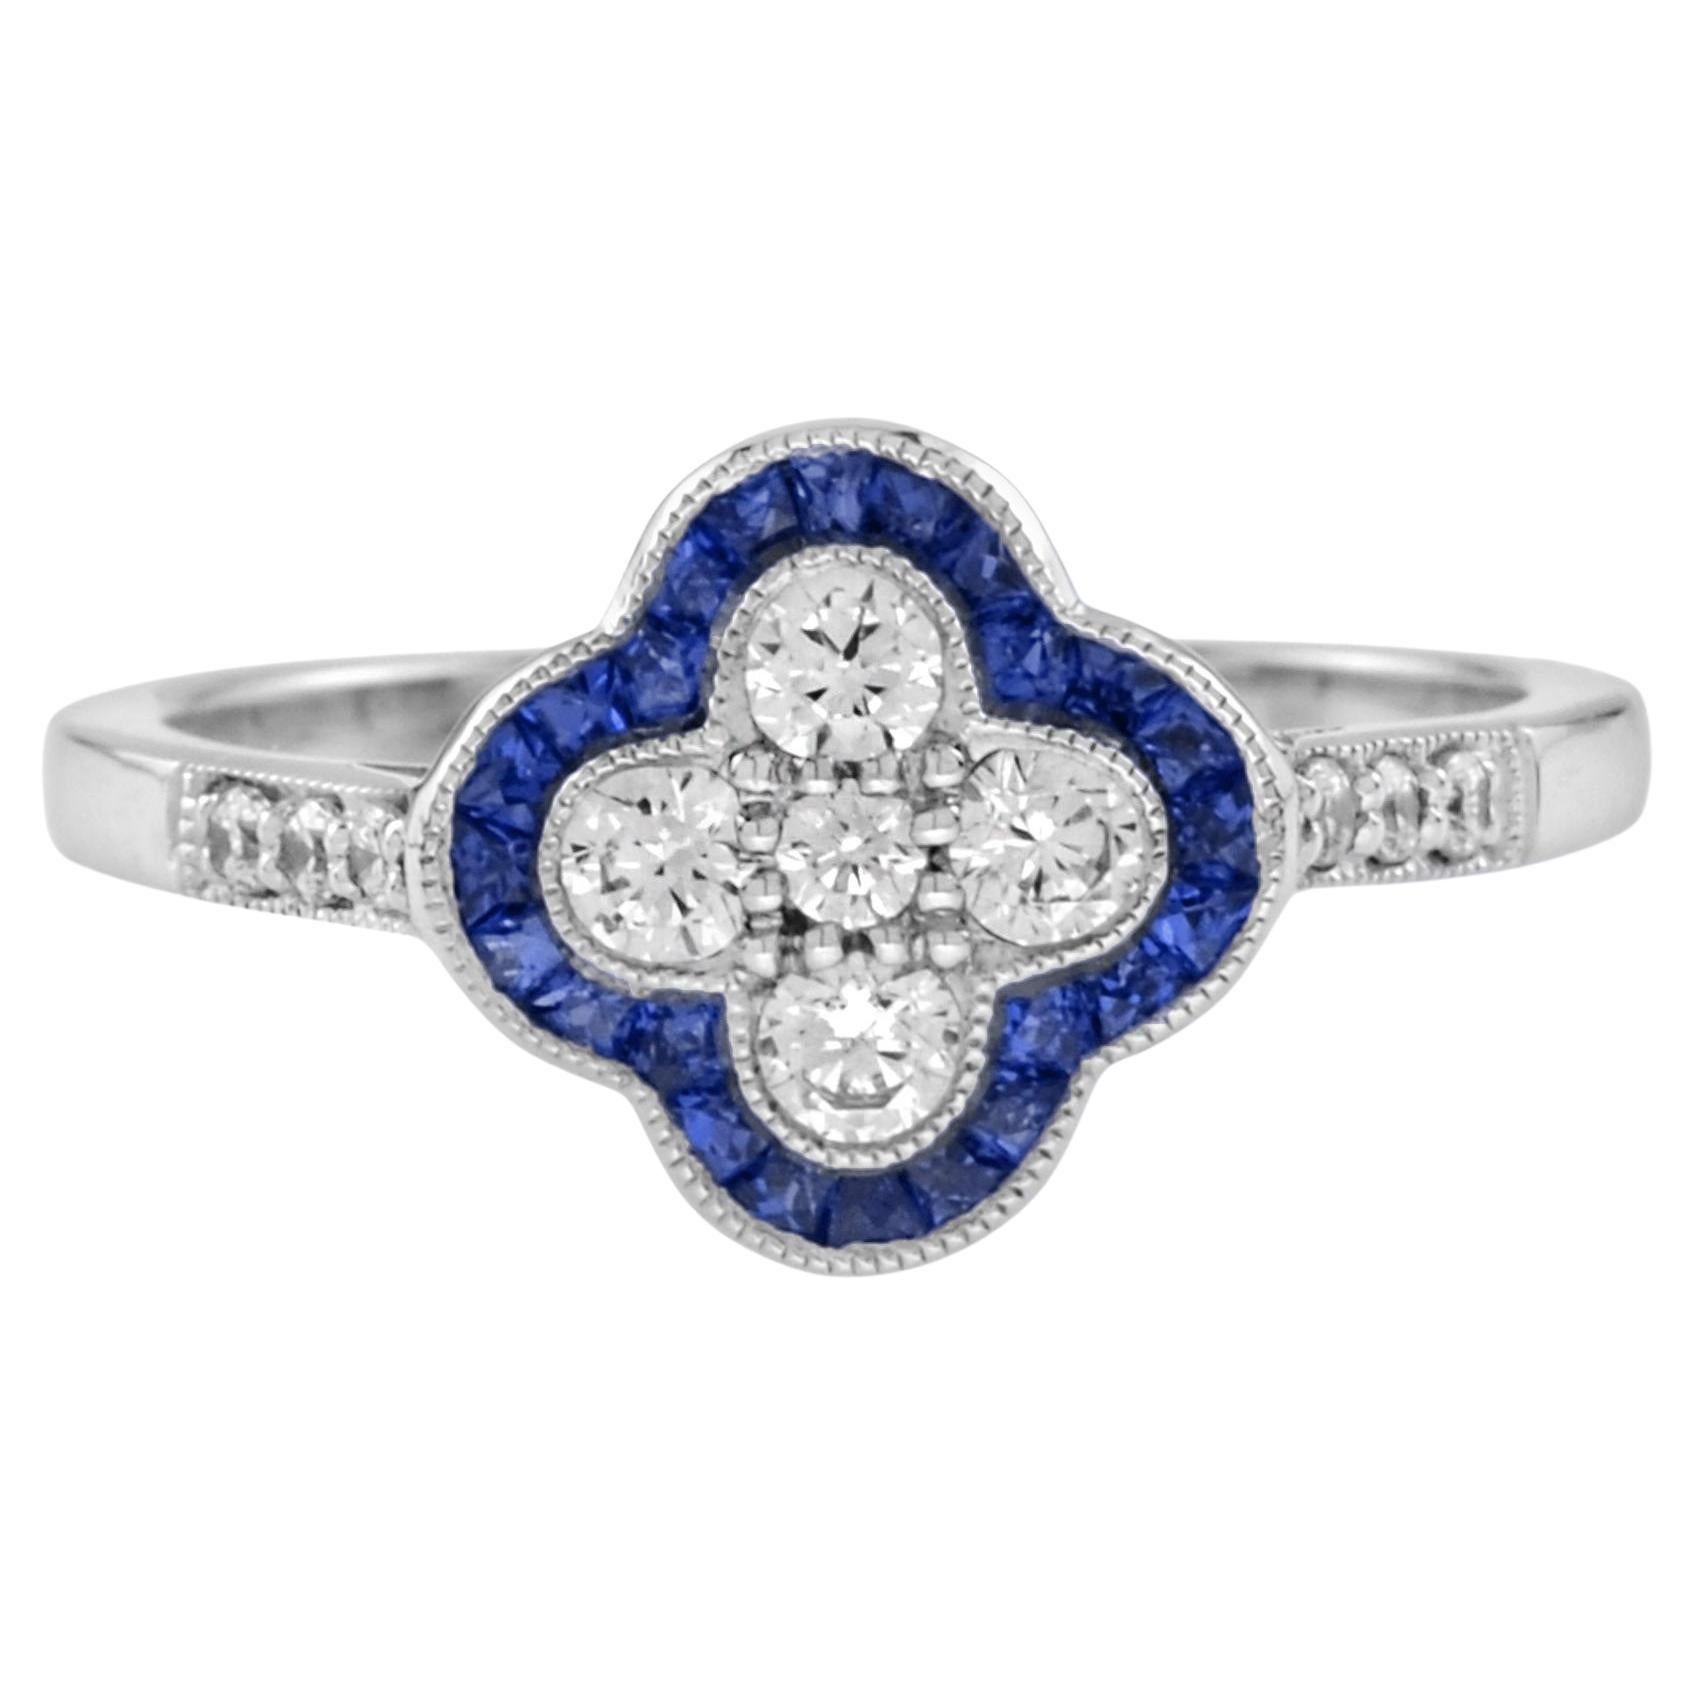 For Sale:  Diamond and Blue Sapphire Art Deco Style Floral Ring in 18K White Gold